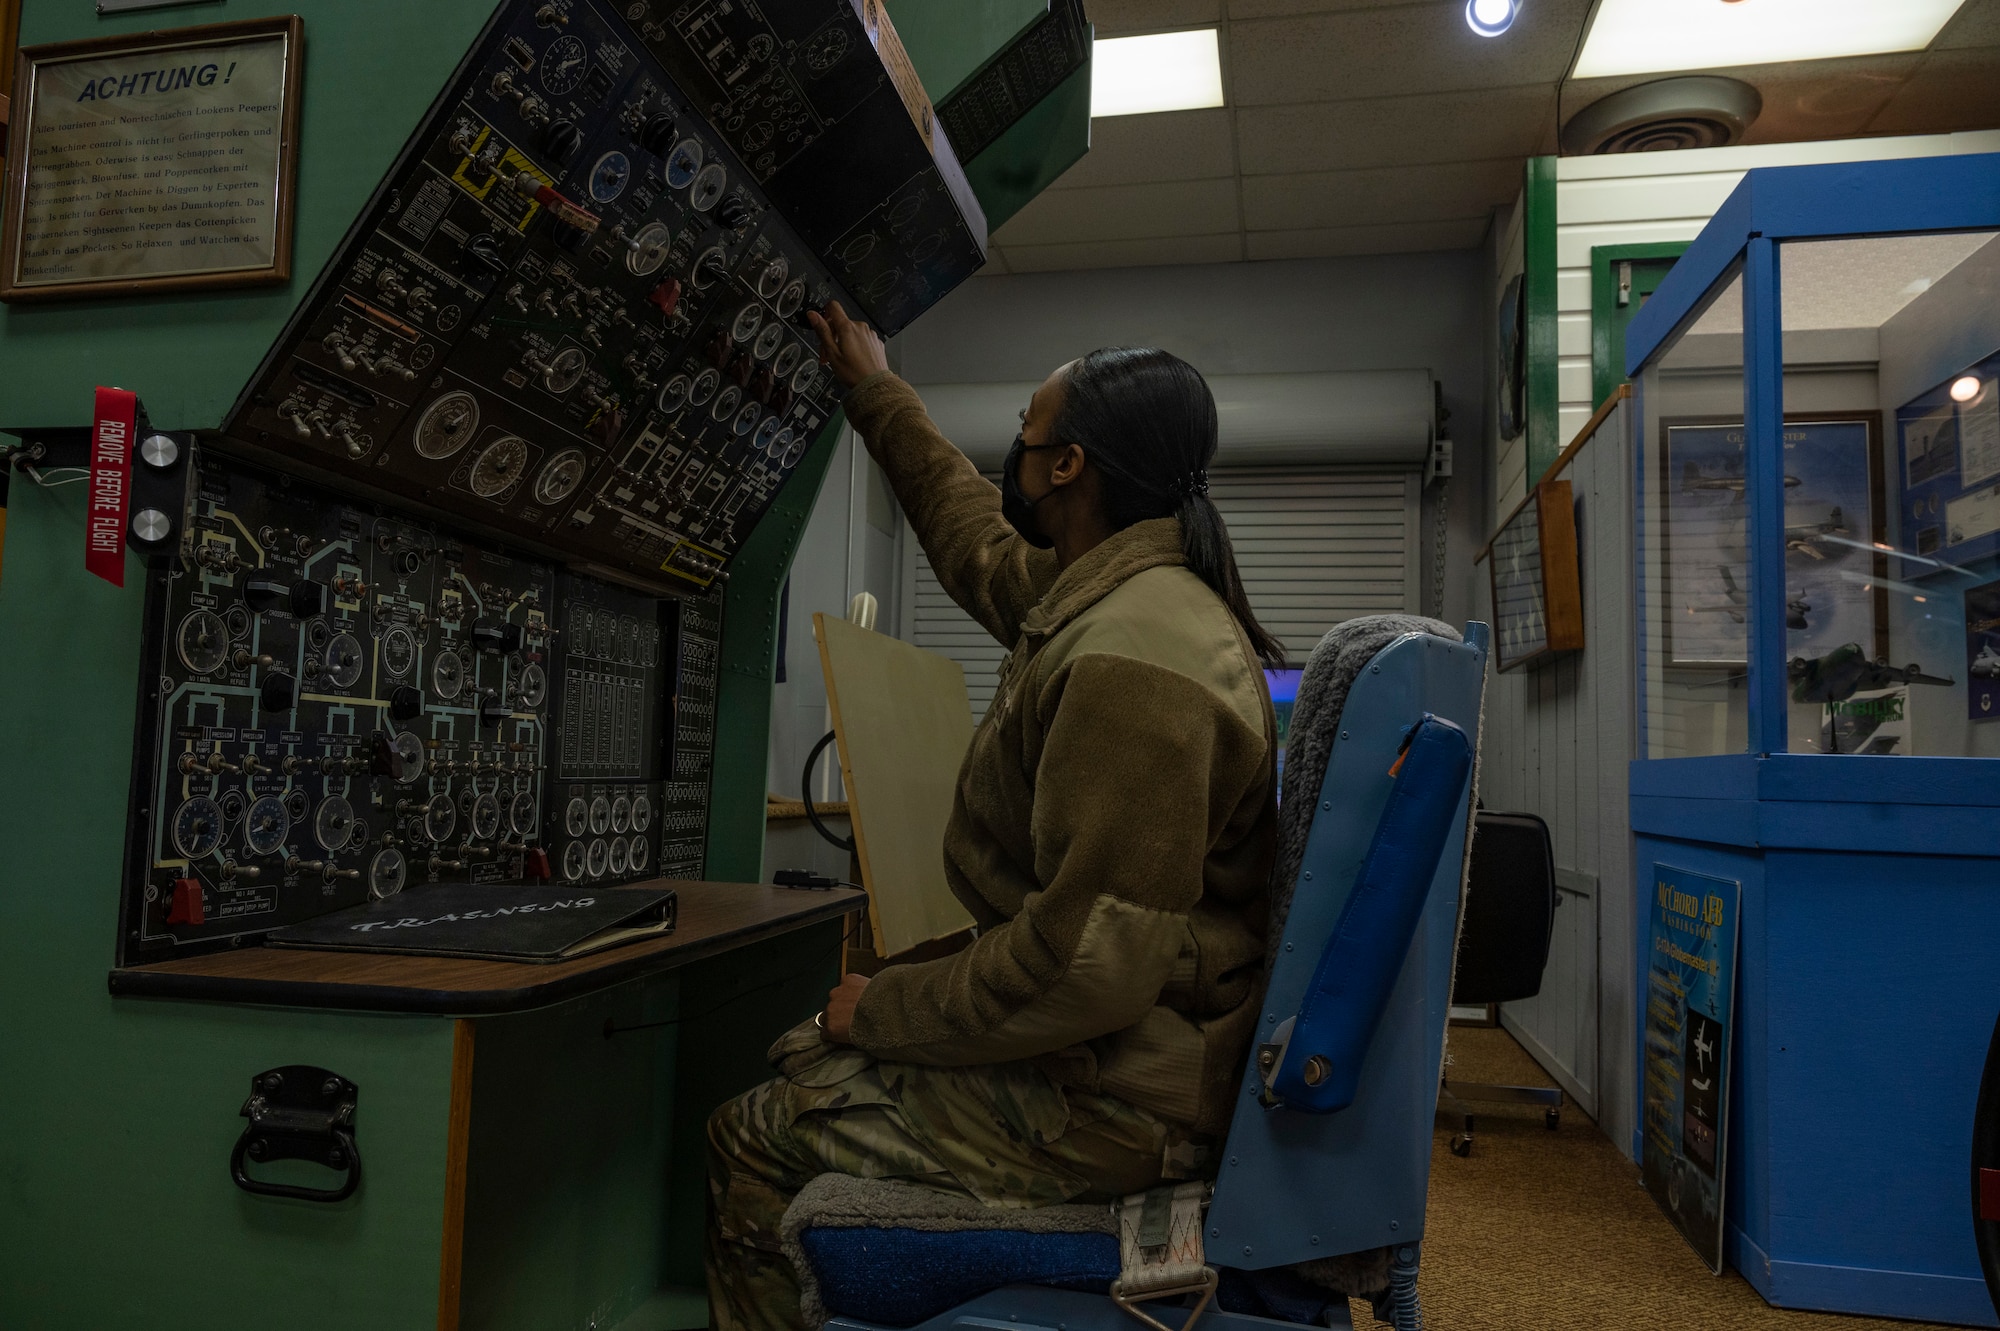 An Airman assigned to the 62nd Airlift Wing sits in an old aircraft simulator in the McChord Air Museum at Joint Base Lewis-McChord, Washington, Feb. 22, 2022. After being closed for almost two years due to the COVID-19 pandemic, the Air Museum reopened its doors to the public. (U.S. Air Force photo by Airman 1st Class Charles Casner)